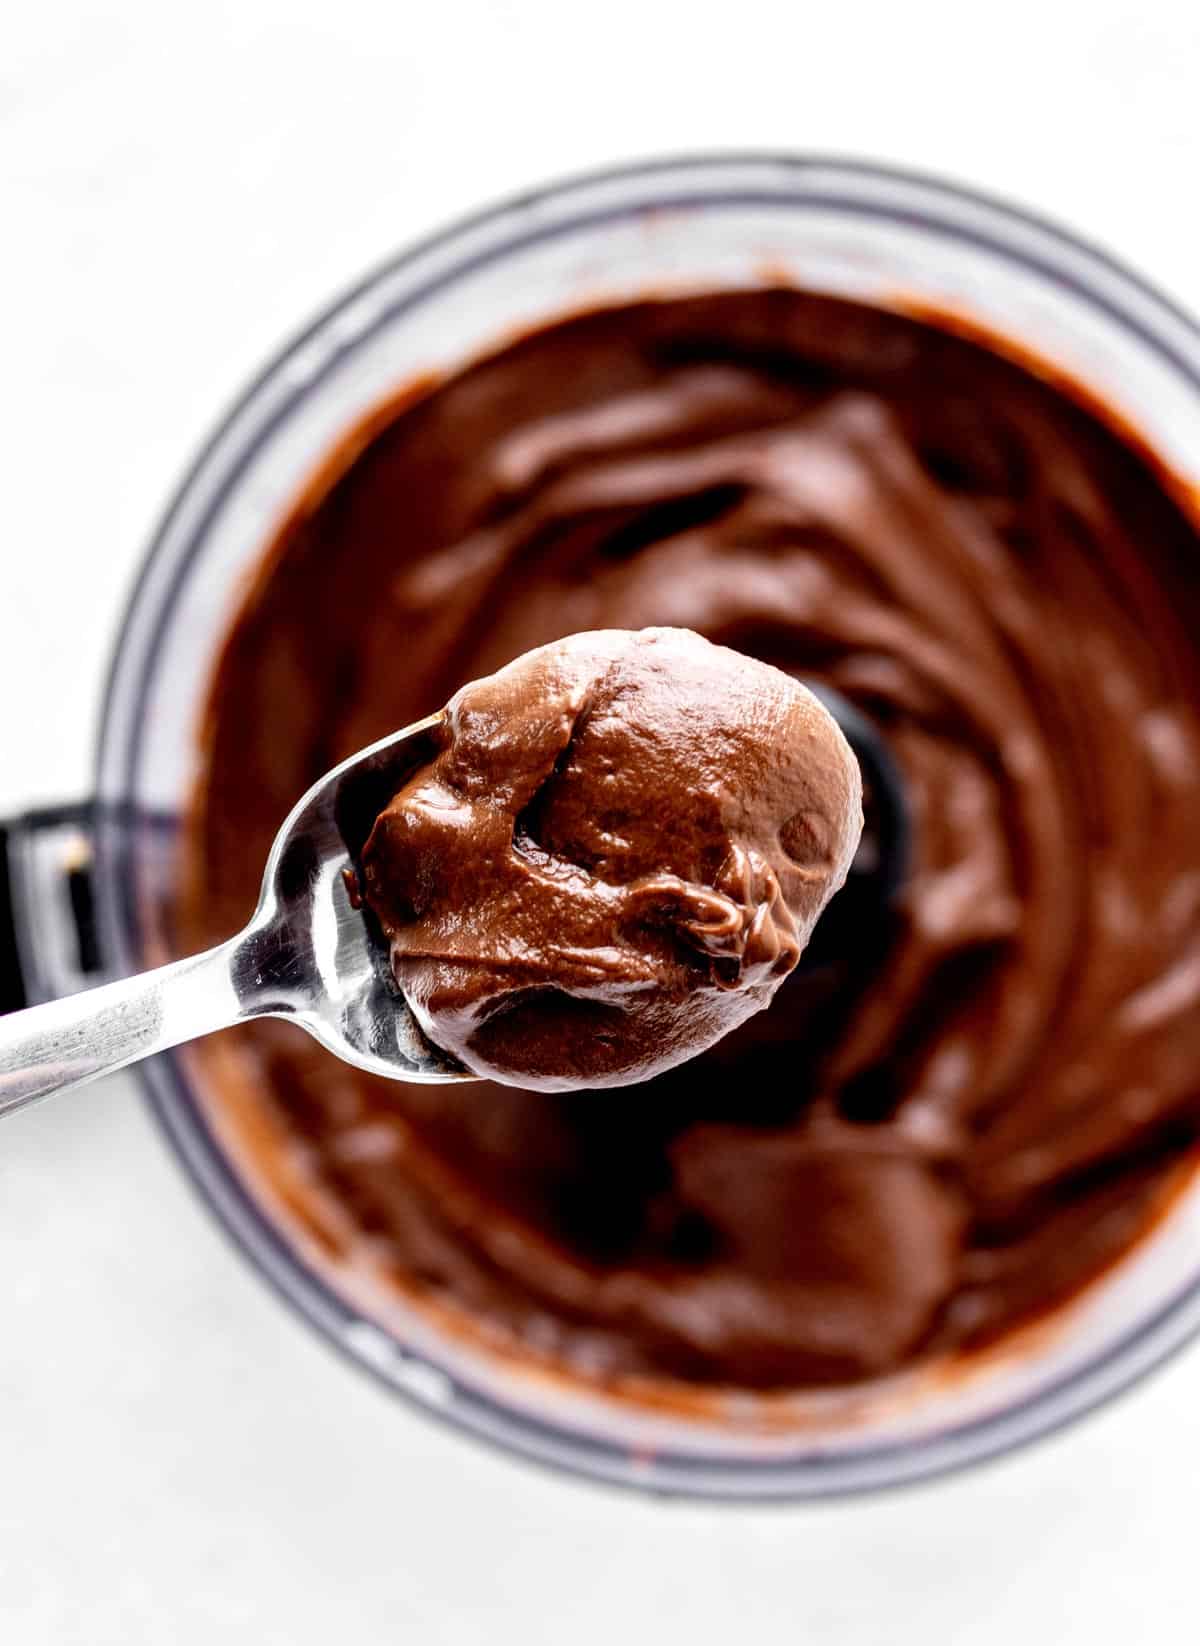 A spoon holding up some creamy chocolate avocado pudding.